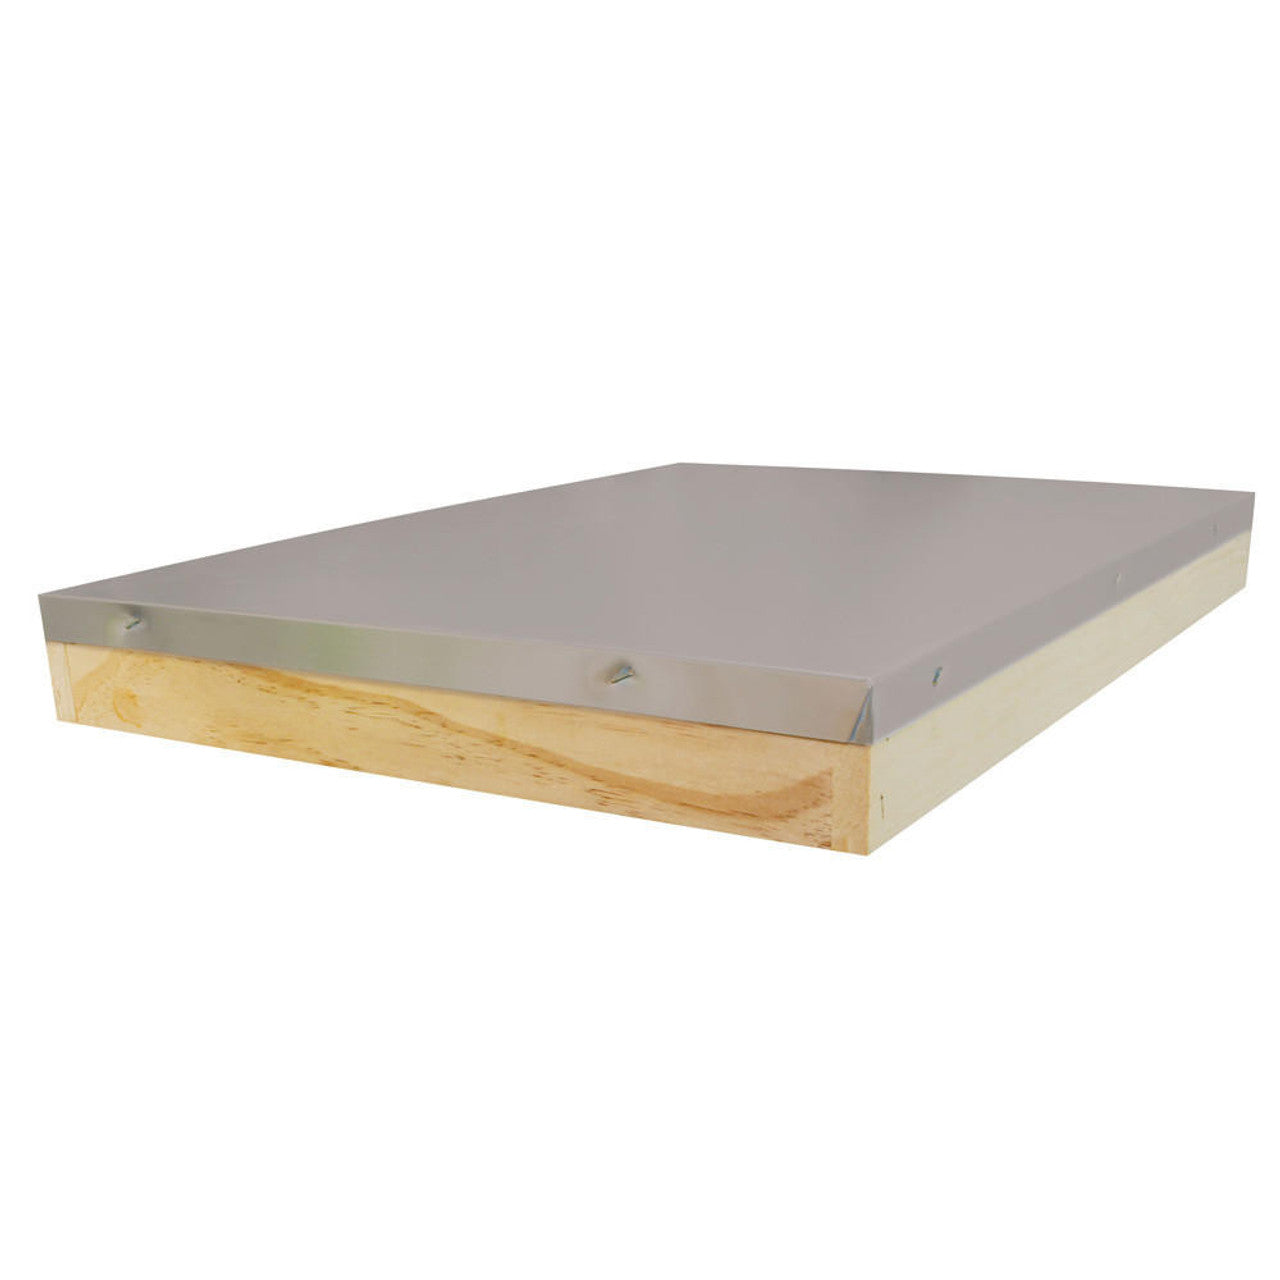 BZ893 Wood Telescoping Outer Cover for 8 Frame Hive